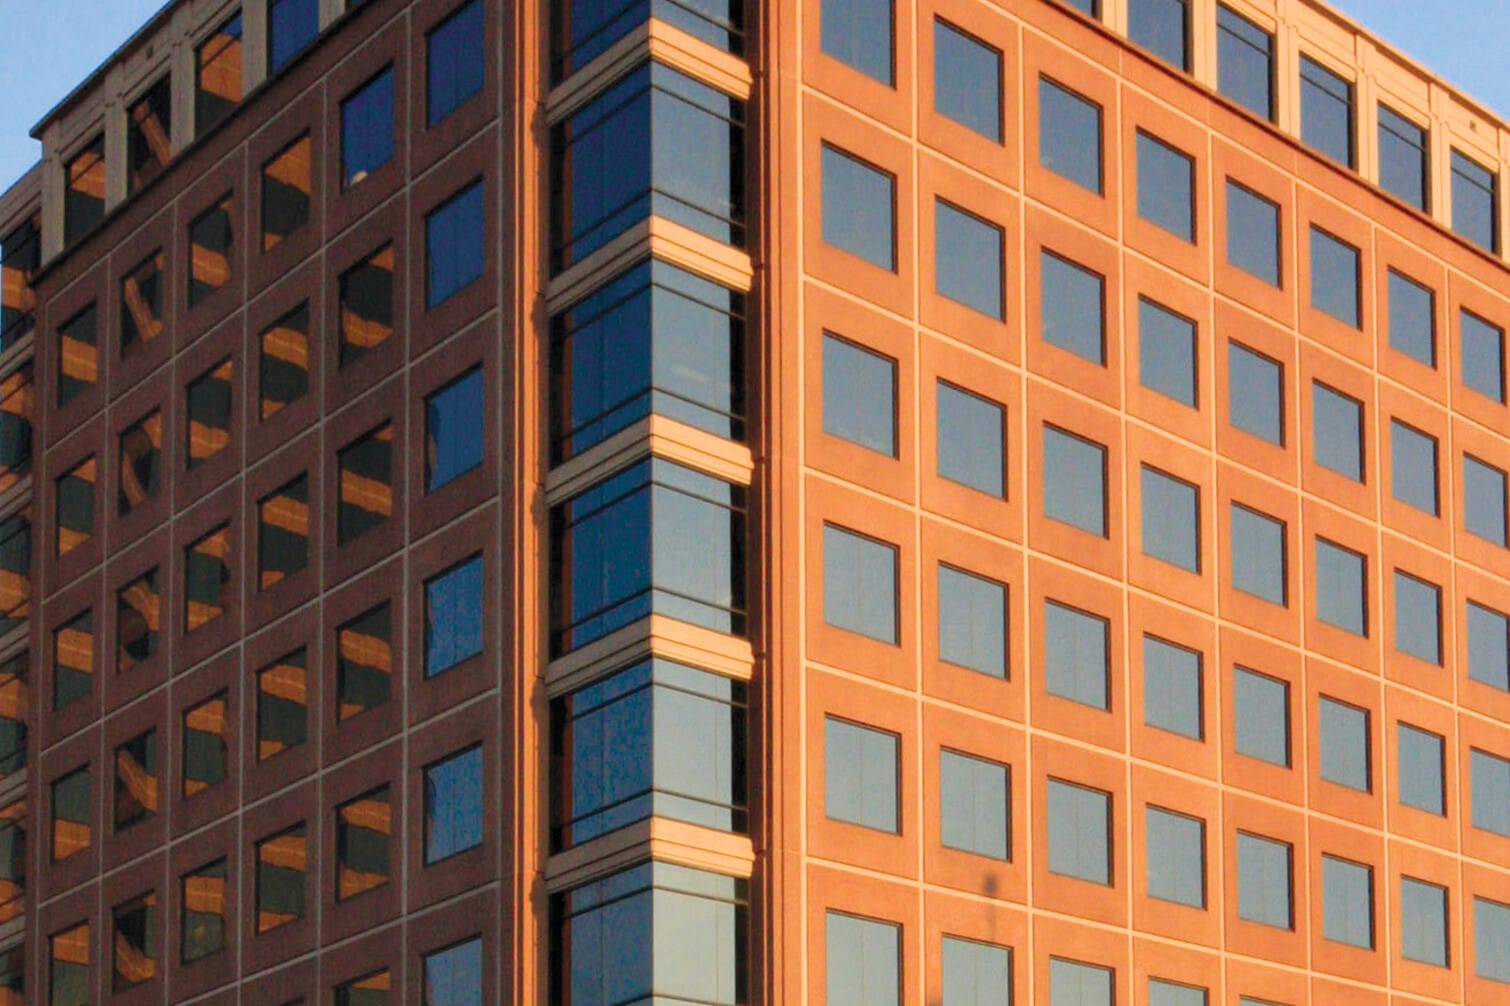 Modern orange and beige office building under clear blue sky, involved in past zero-cash-flow transactions, displaying symmetric windows and a triangular architectural feature at the top corner.